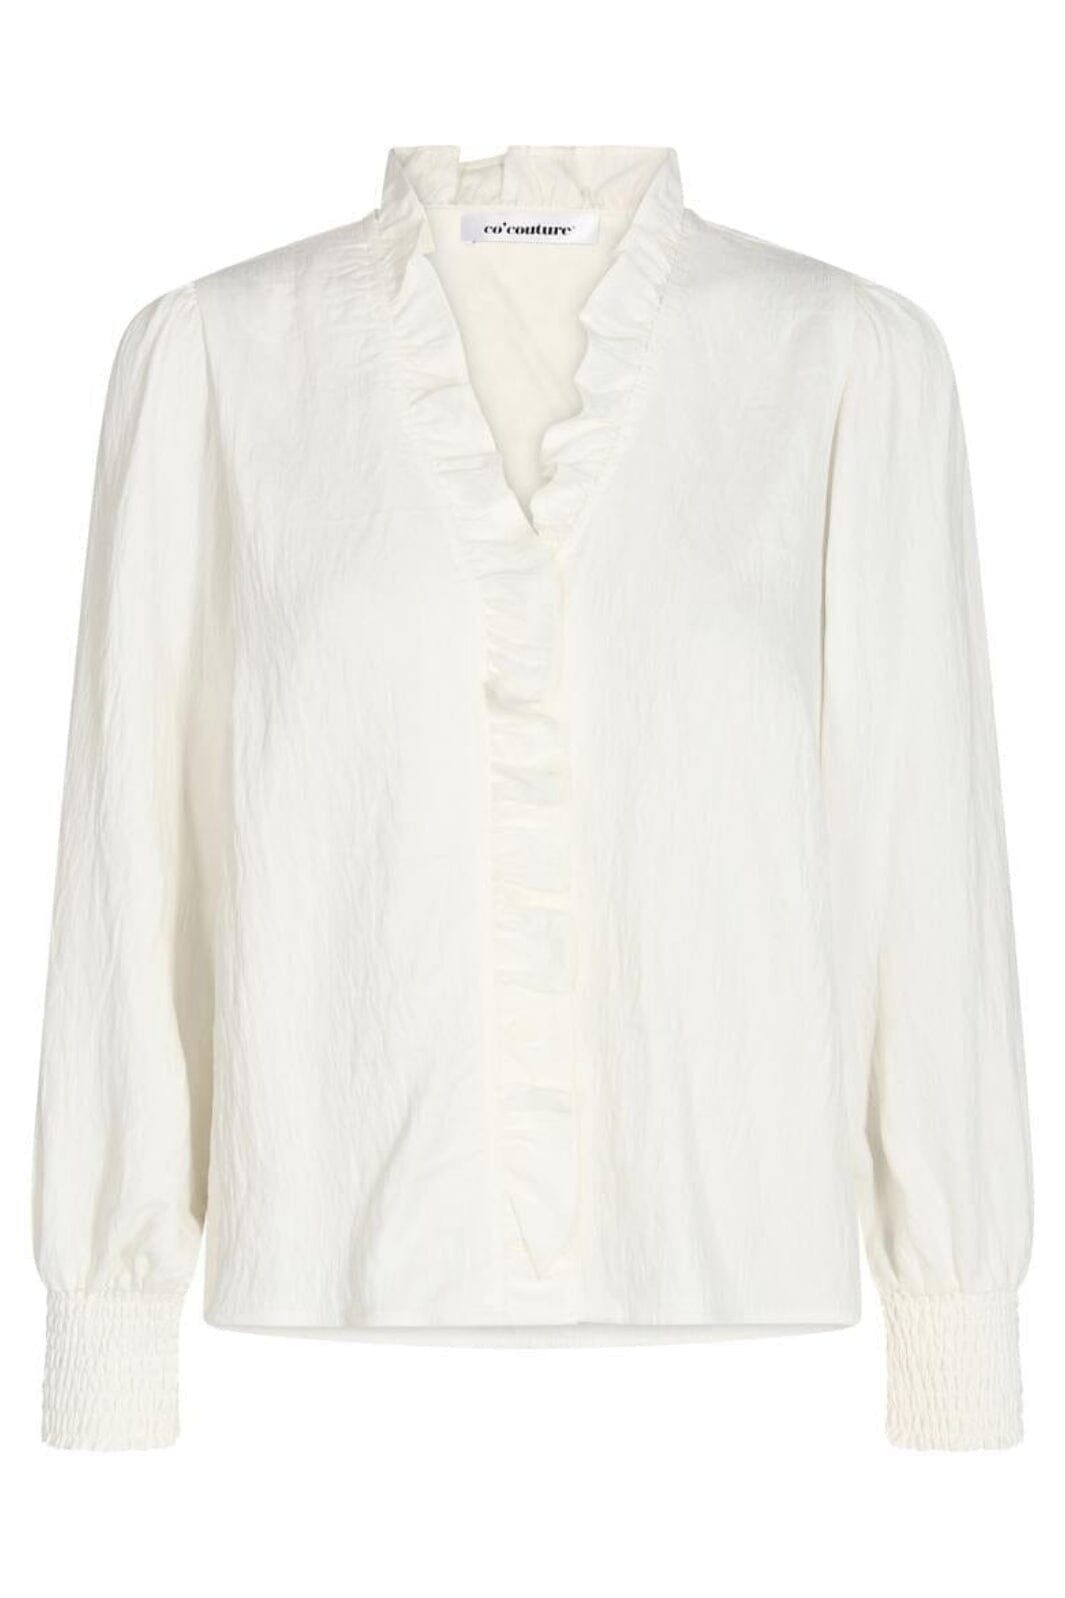 Co´couture - Suedacc Frill Shirt - 4000 White Bluser 